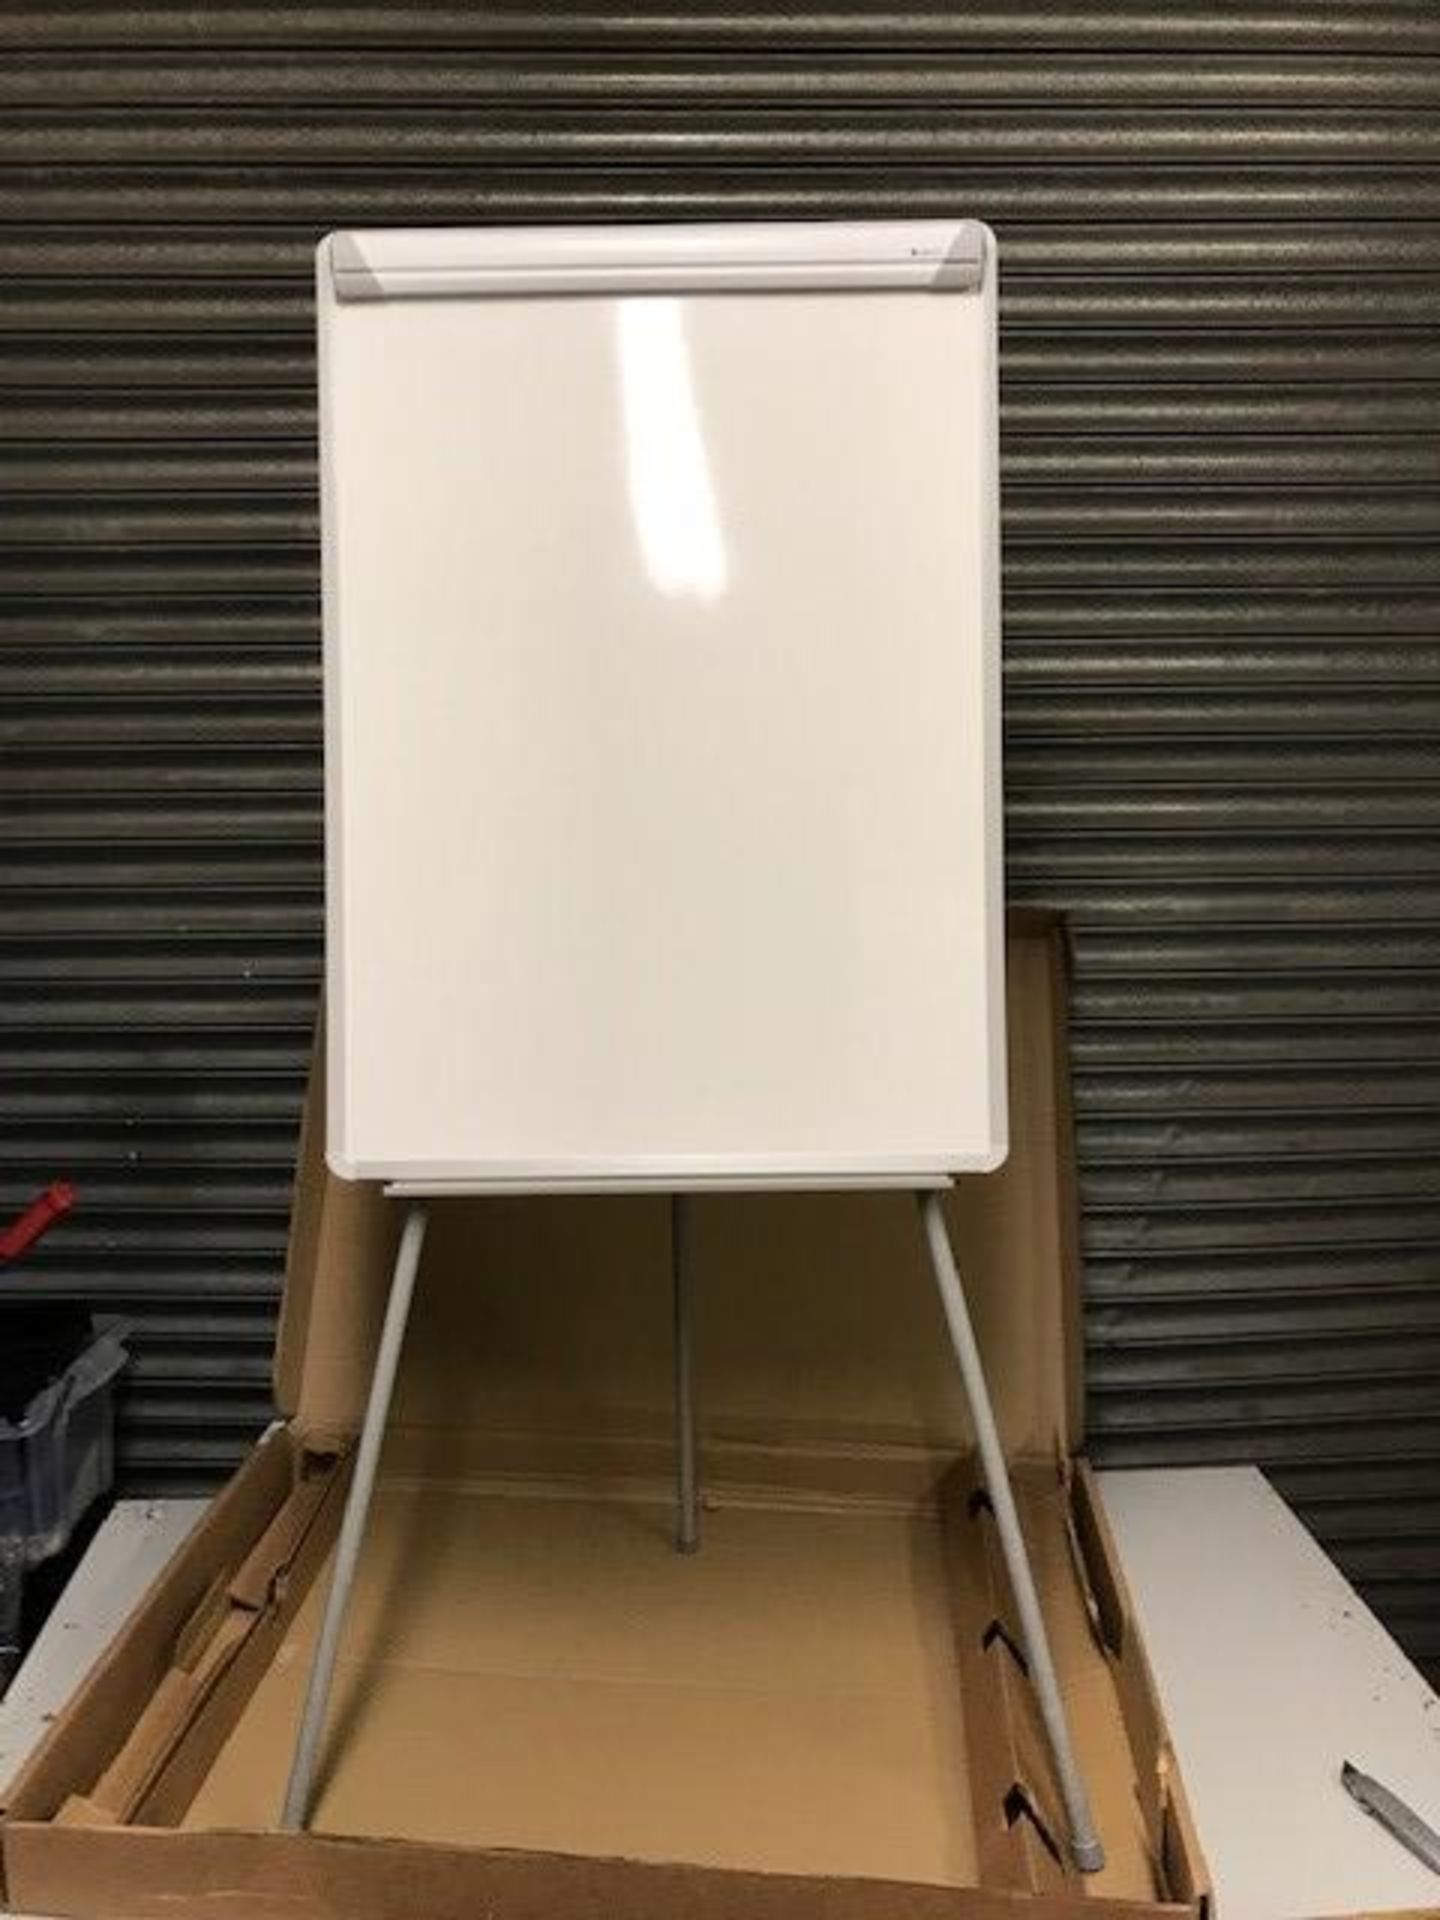 1 x Banner non-magnetic A1 flipchart easel/whiteboard with tripod legs